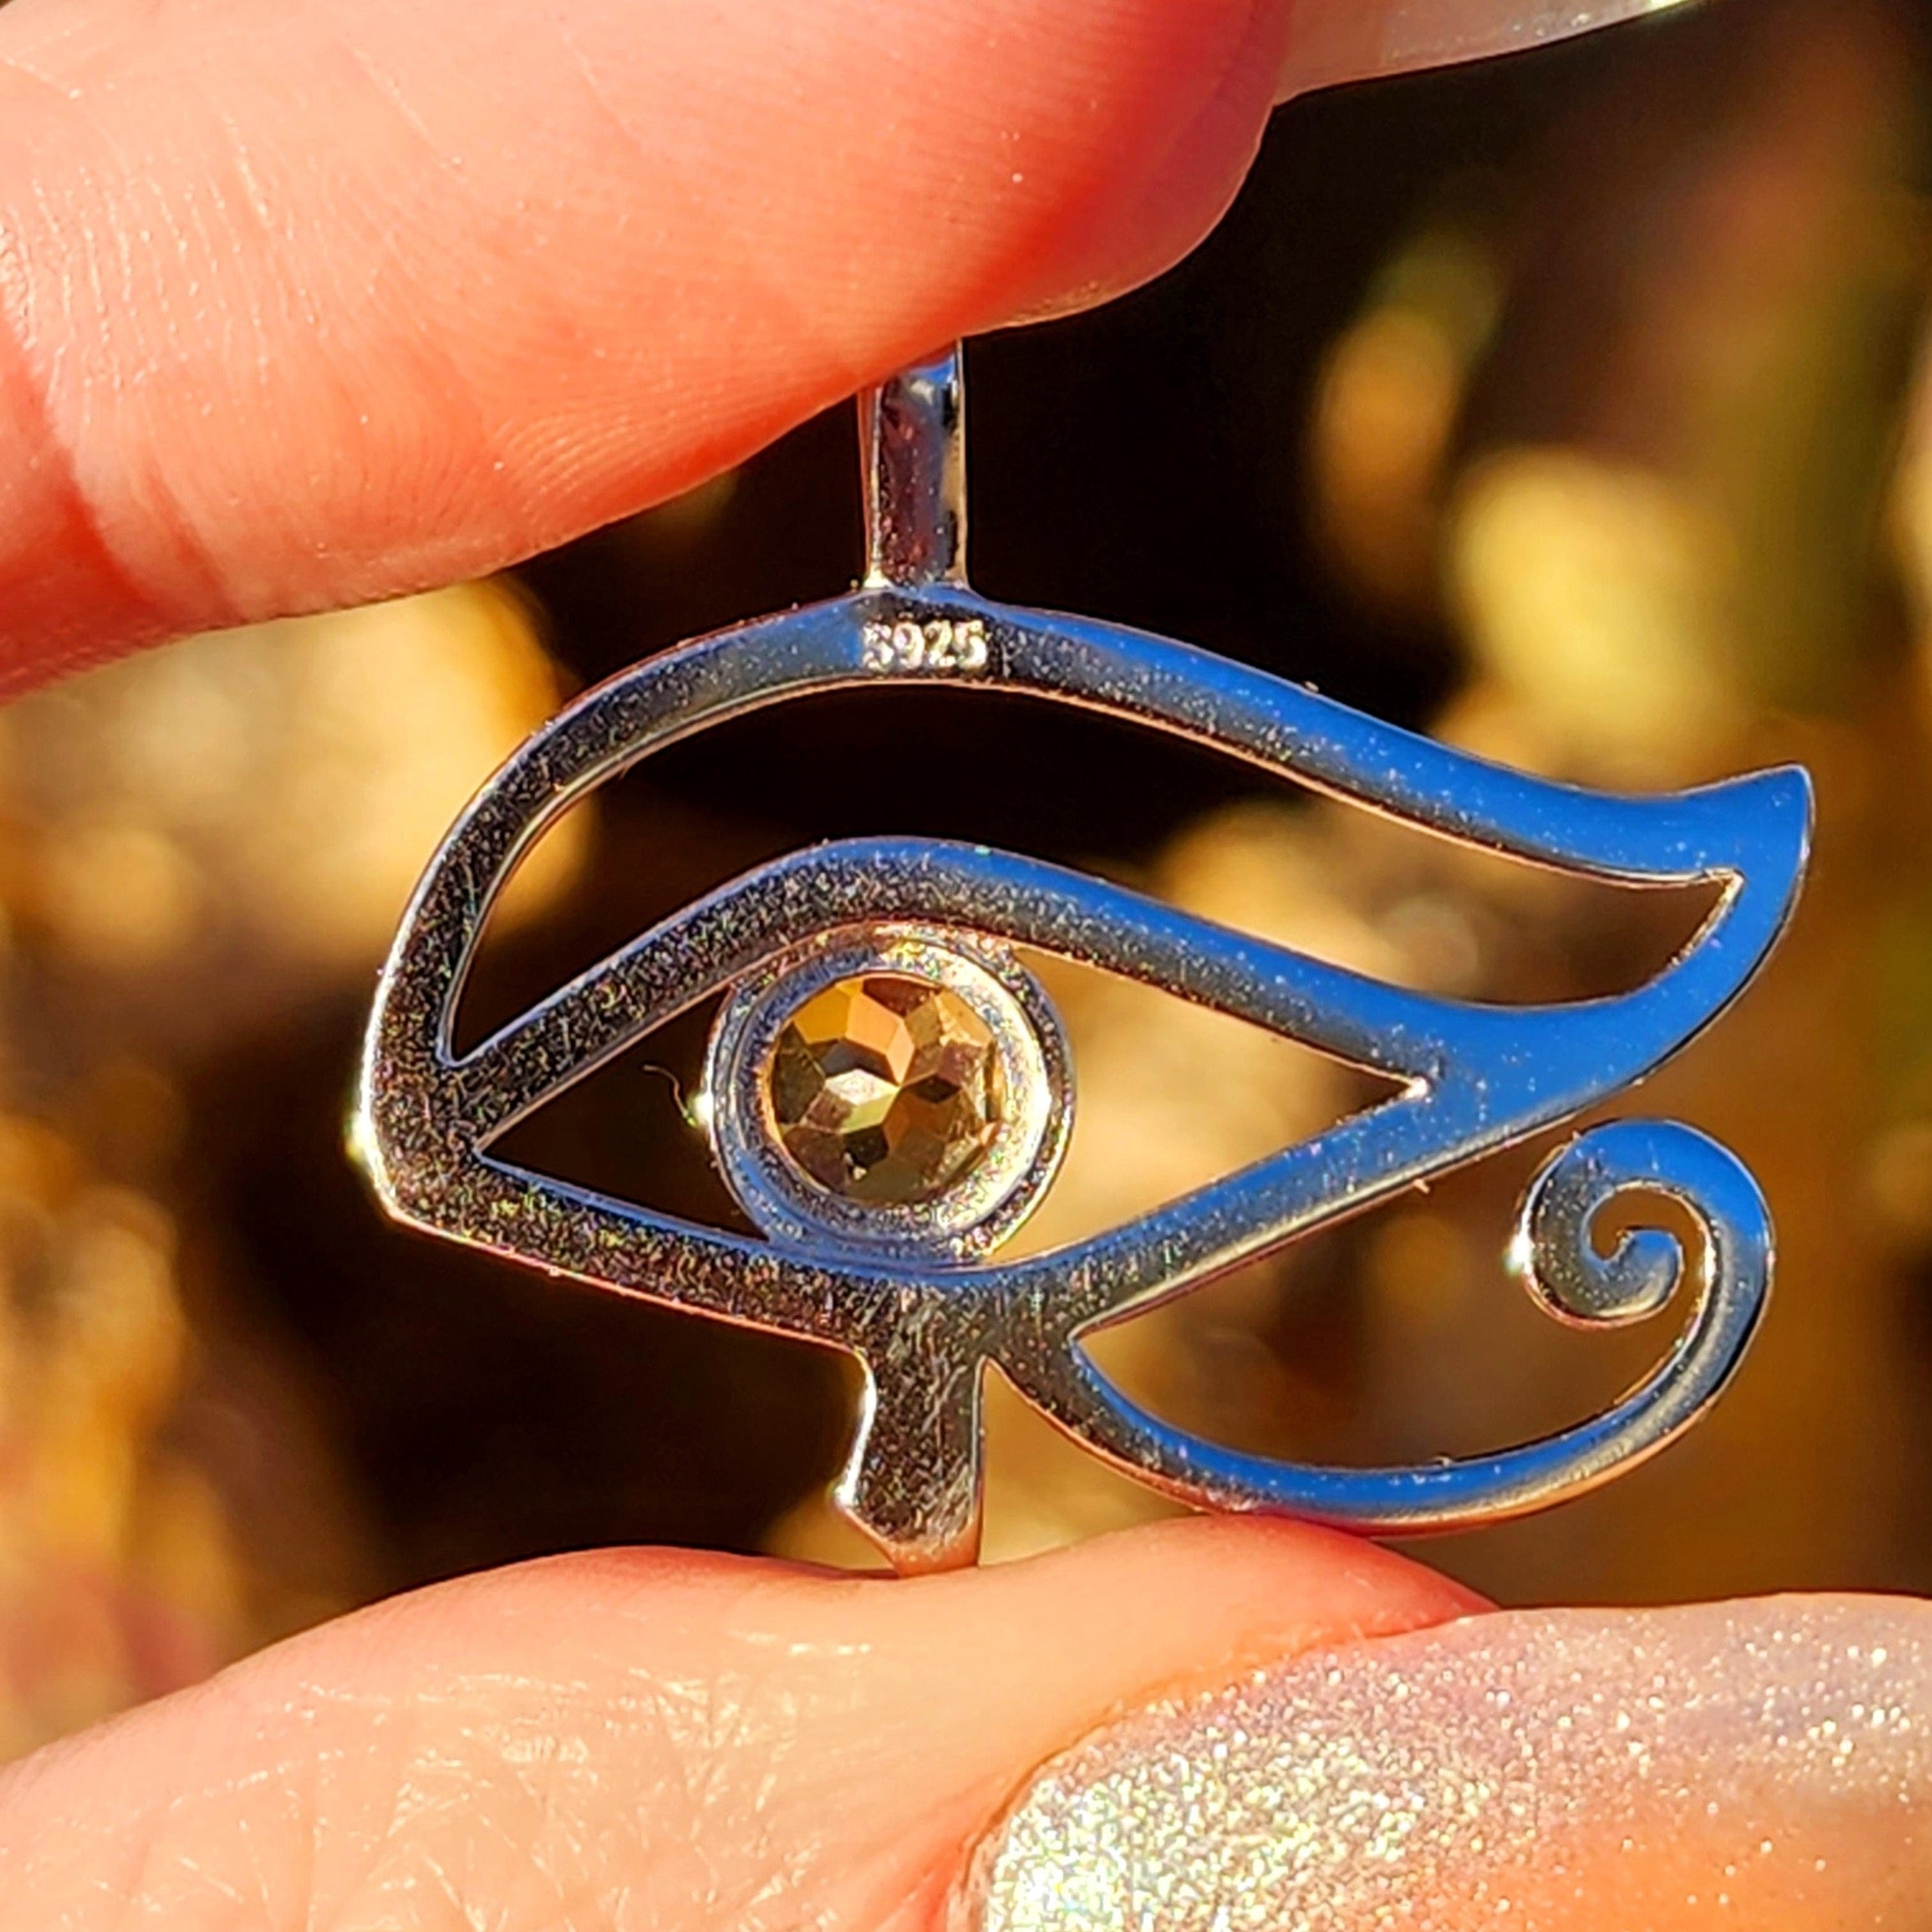 Citrine Eye of Ra Amulet Pendant .925 Silver for Abundance, Protection and Power